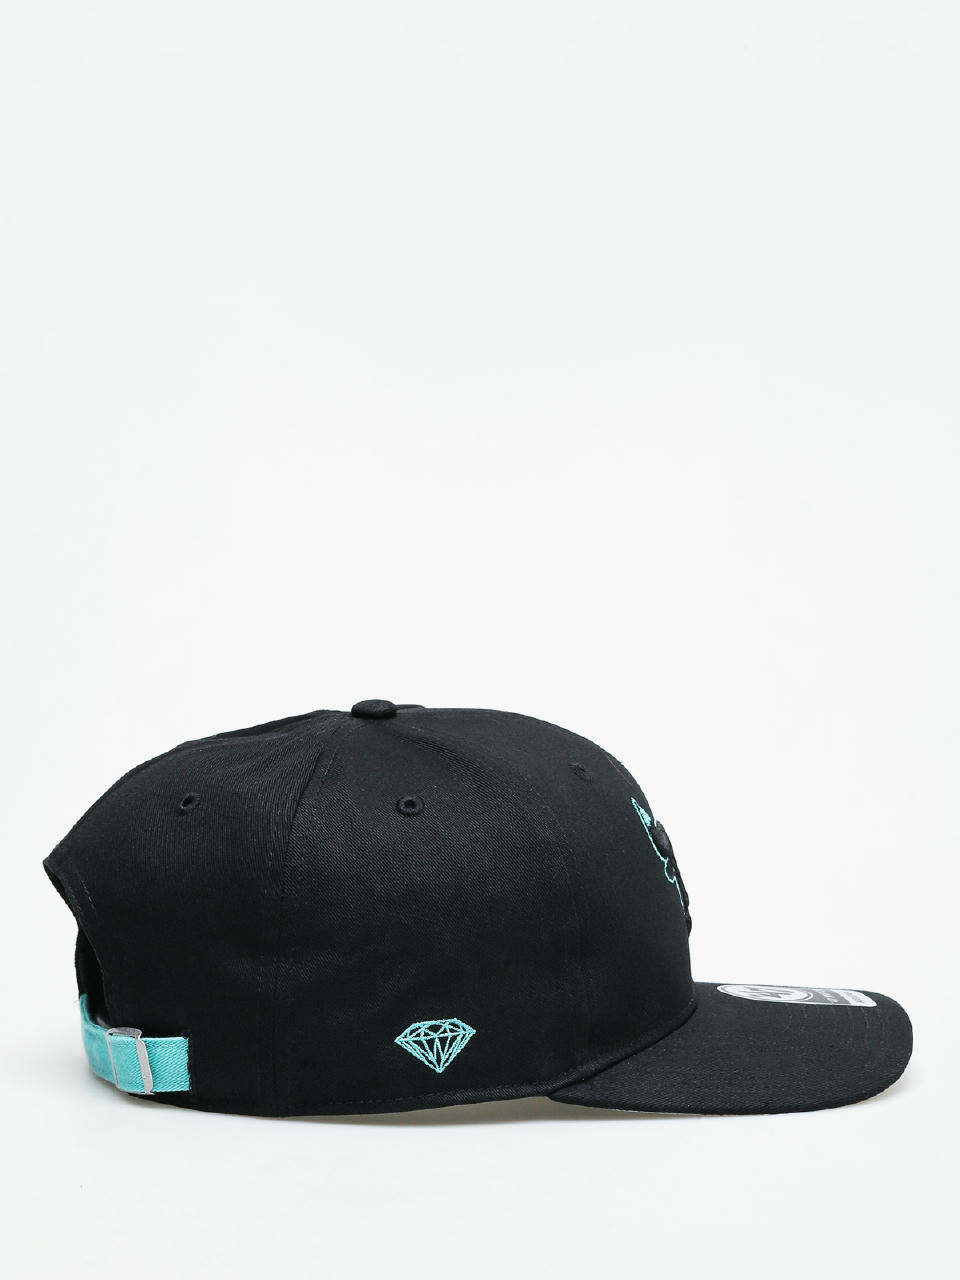 47 - Available now, the Diamond Supply Co x '47